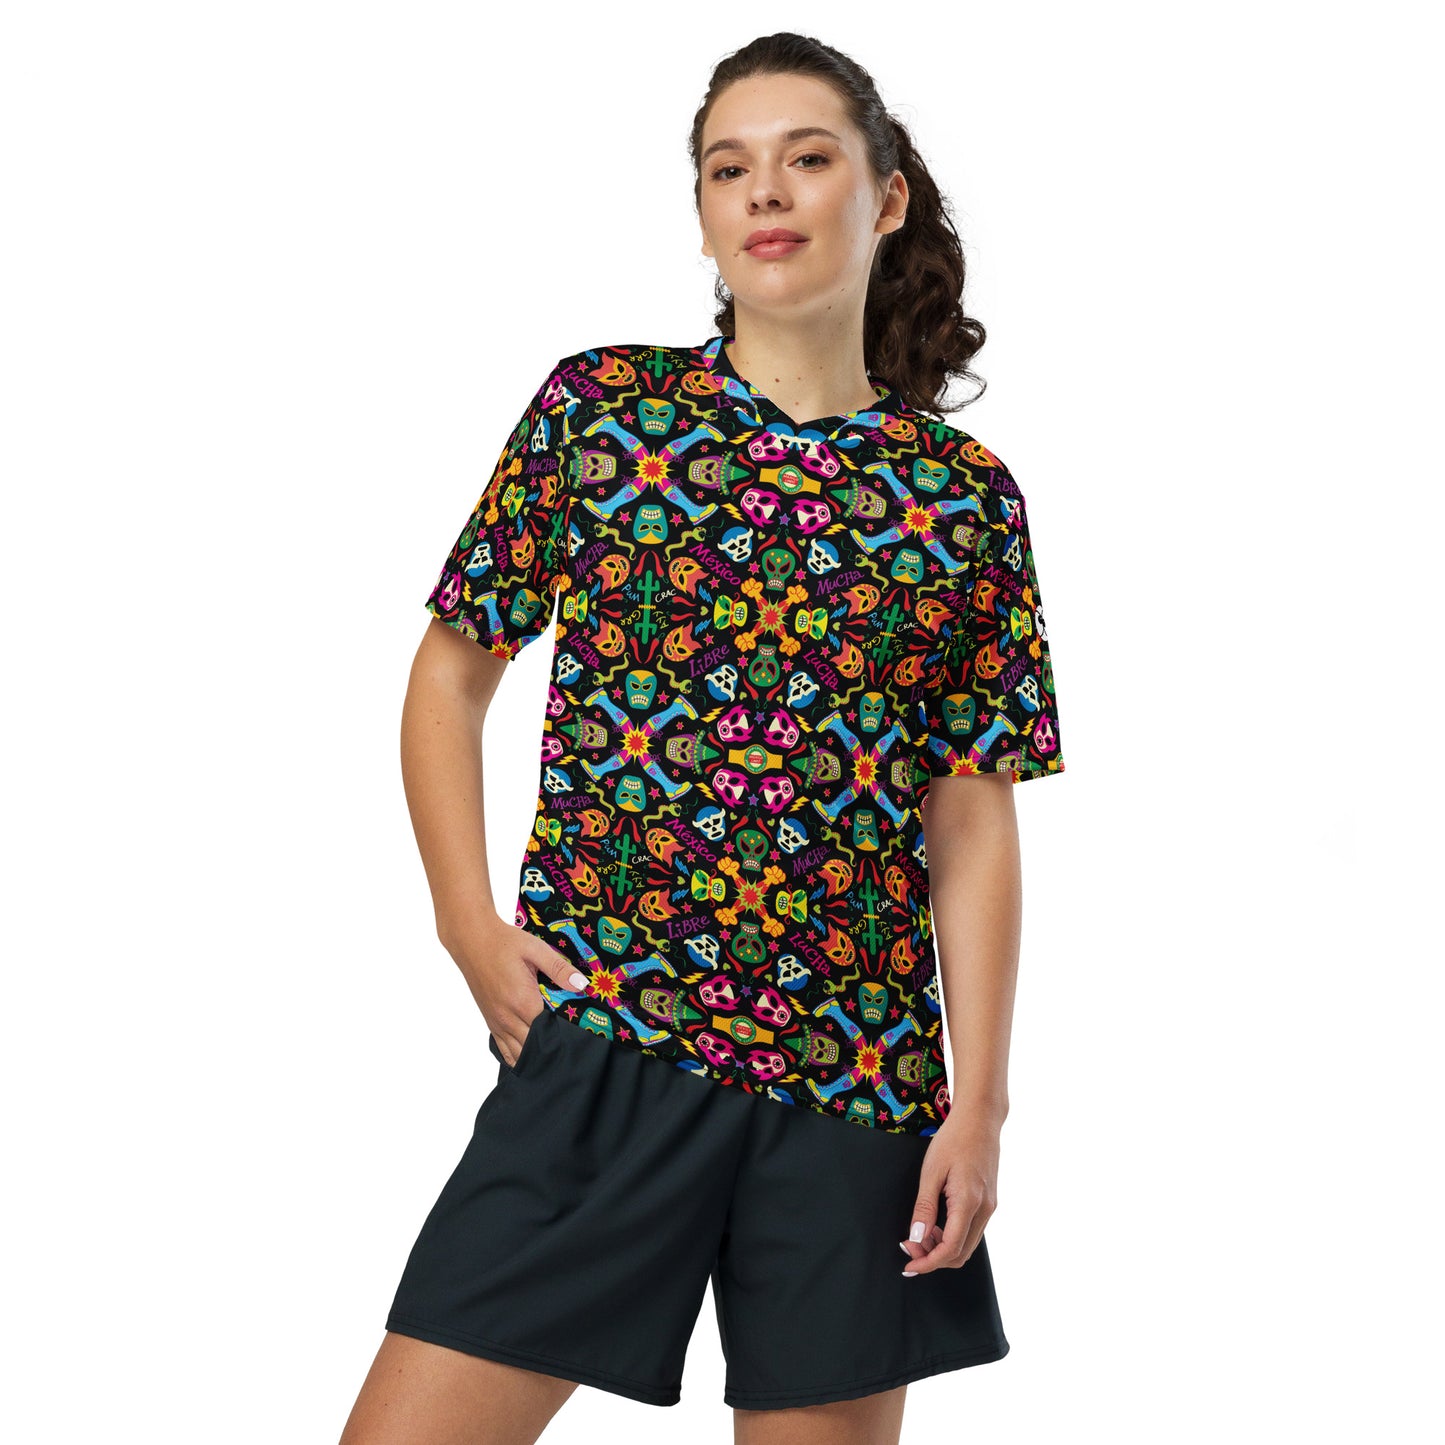 Mexican wrestling colorful party Recycled unisex sports jersey. Woman wearing Zoo&co’s T-Shirt